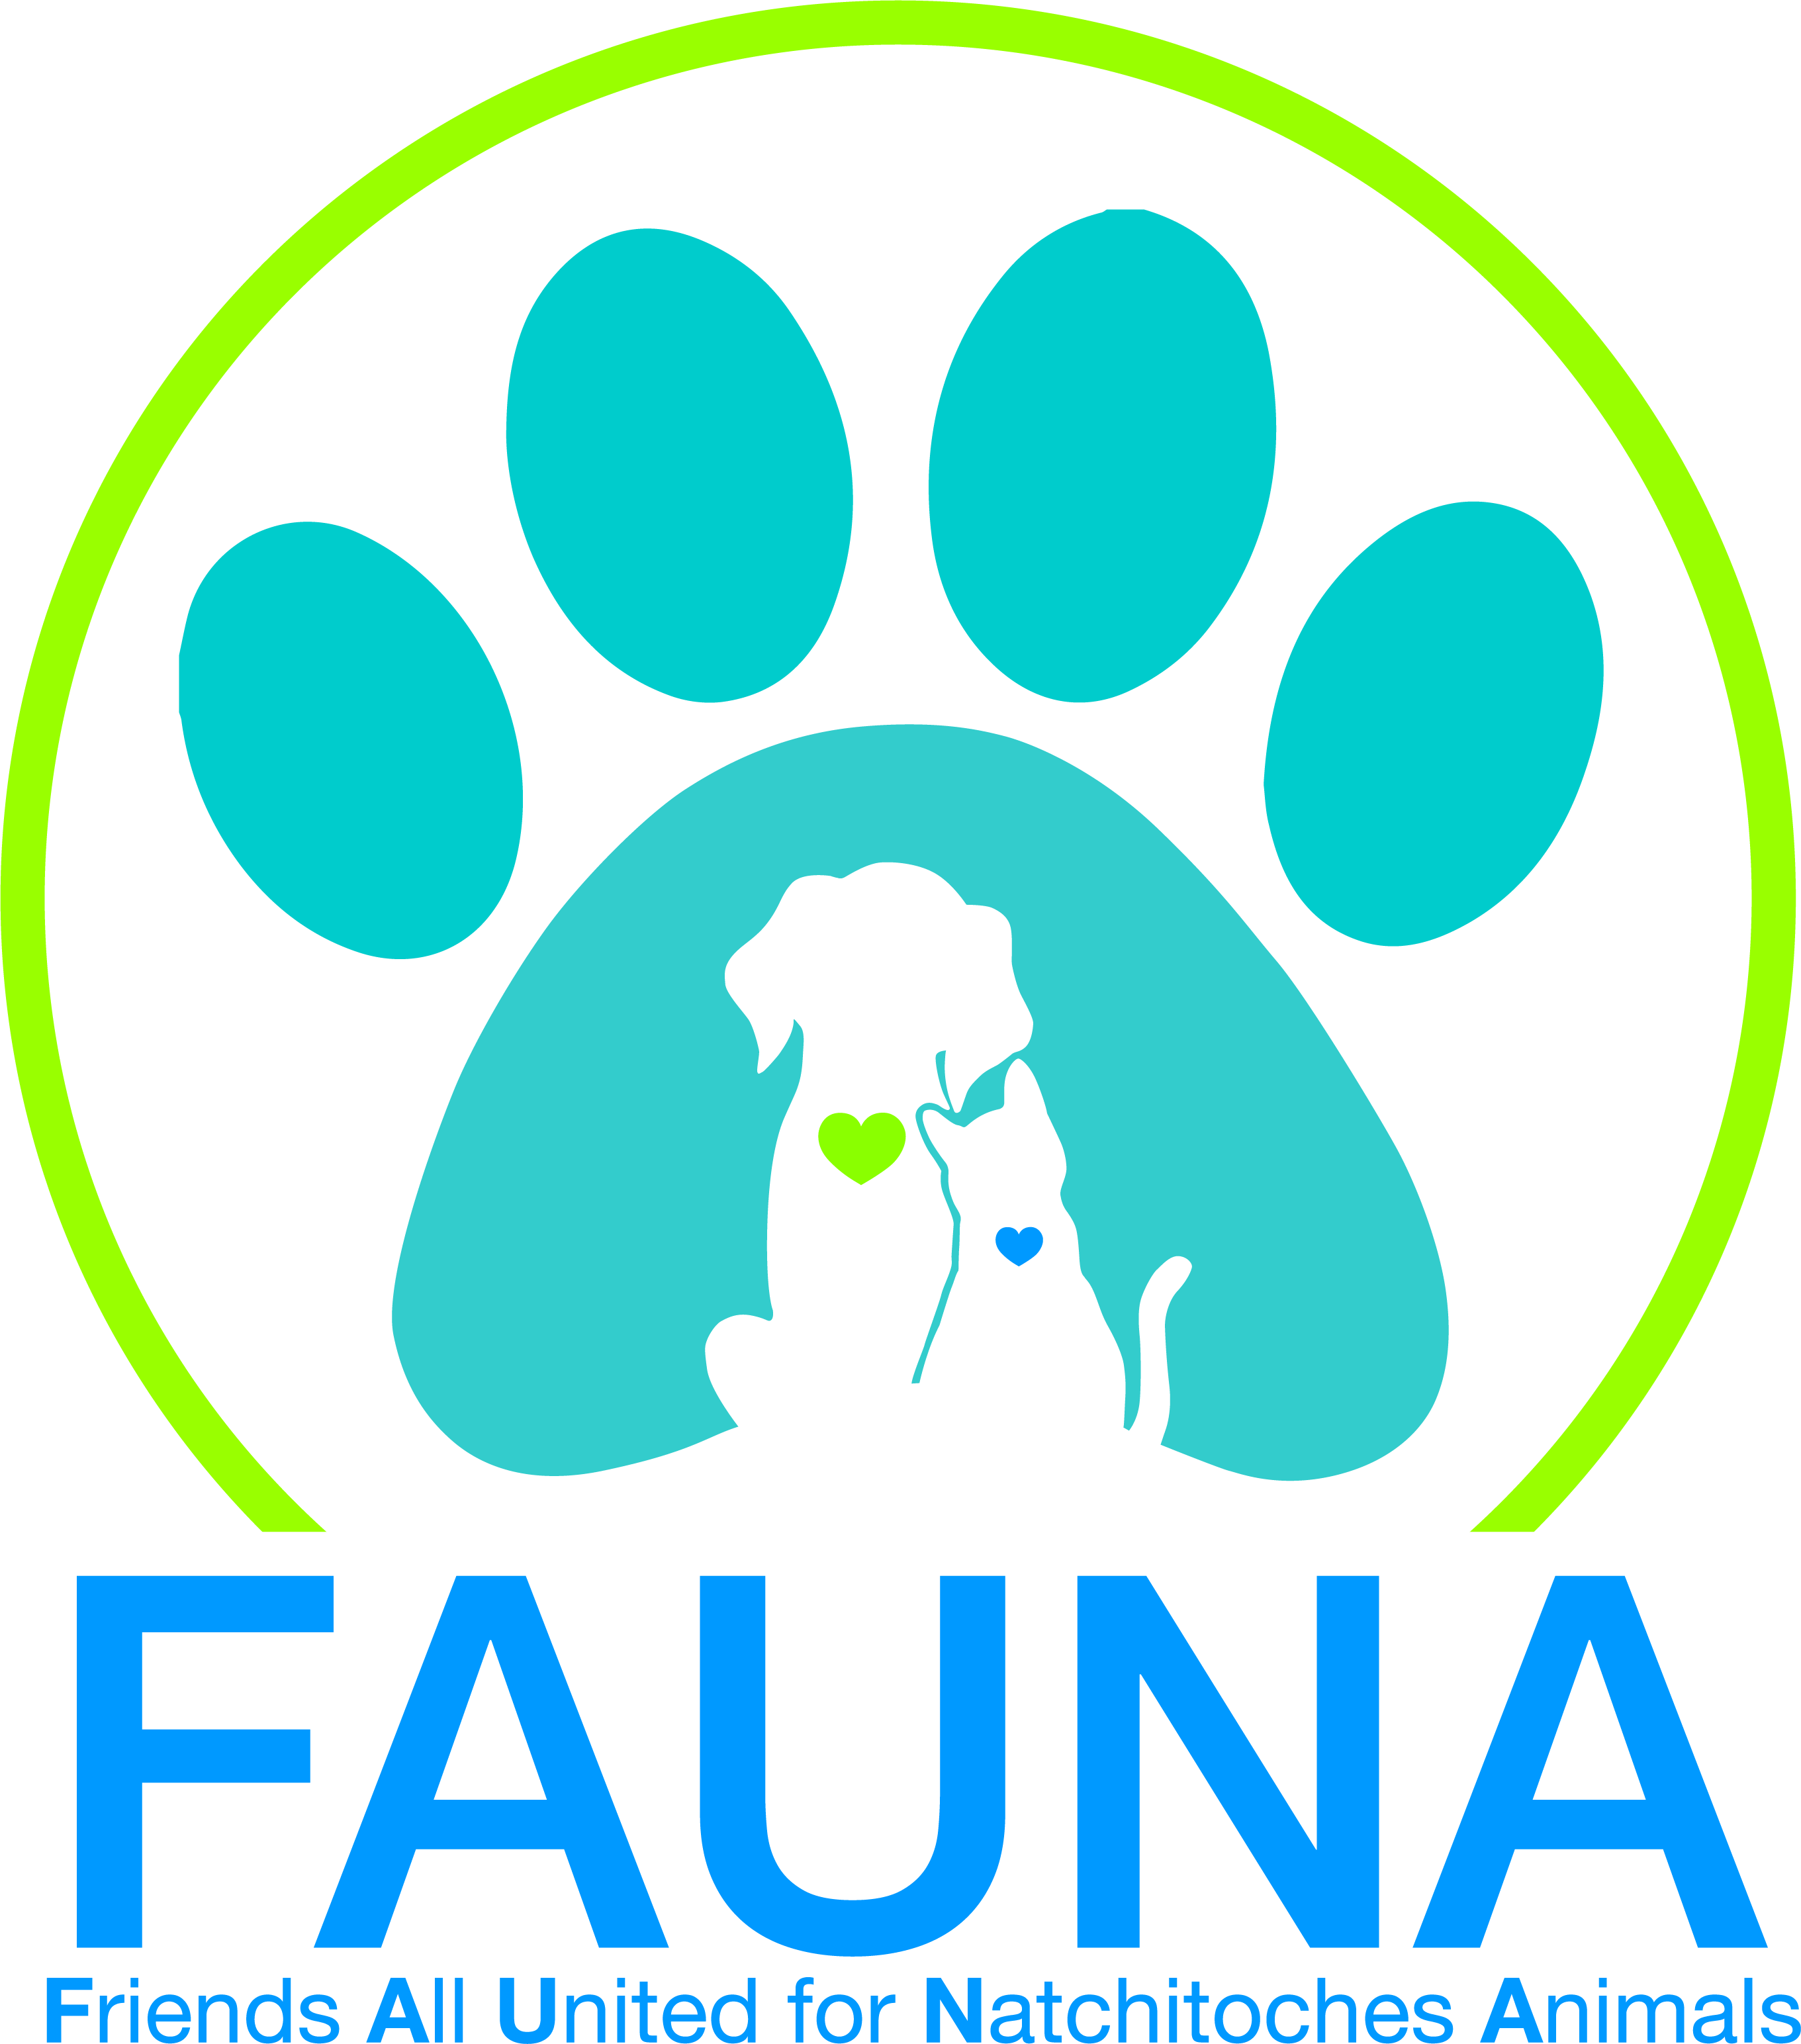 FAUNA - Friends All United for Natchitoches Animals